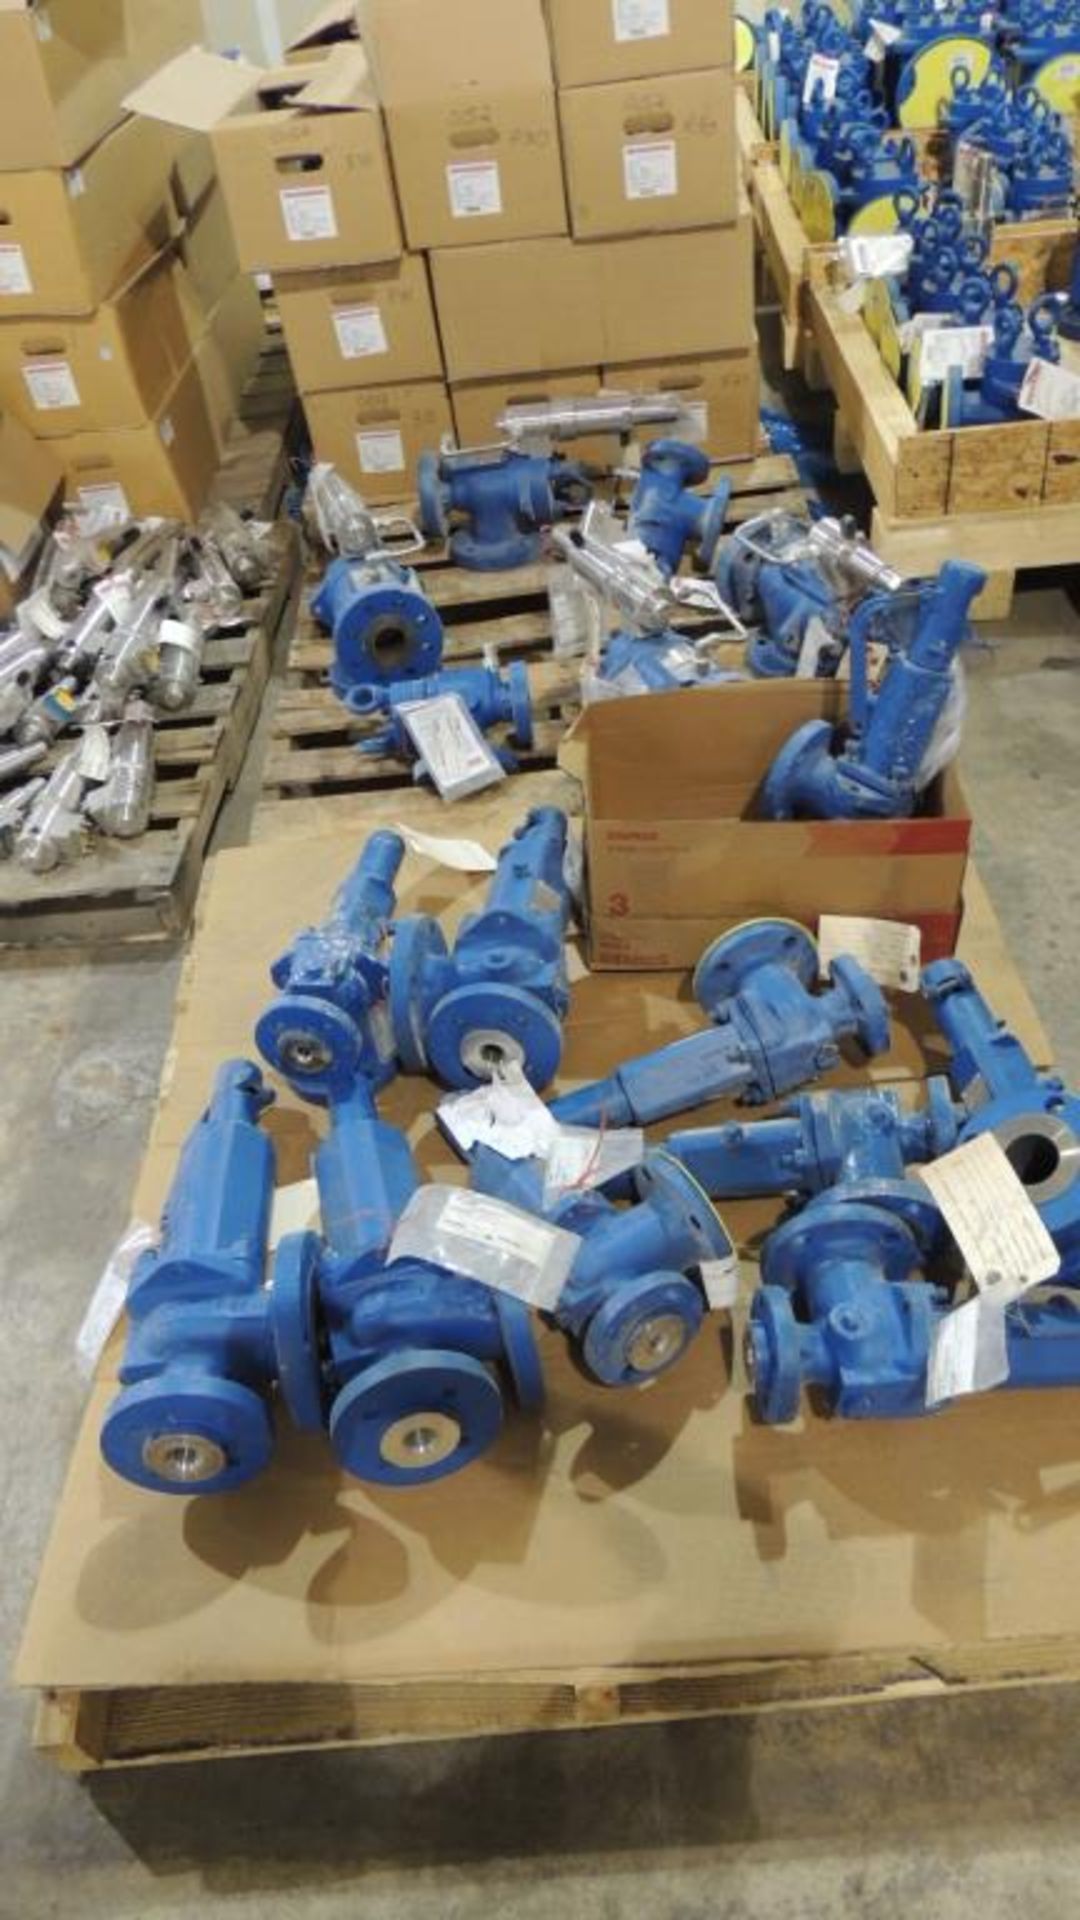 Large Quantity of Leser Relief and Safety Valves, plus Spare Parts Kits - Image 359 of 374